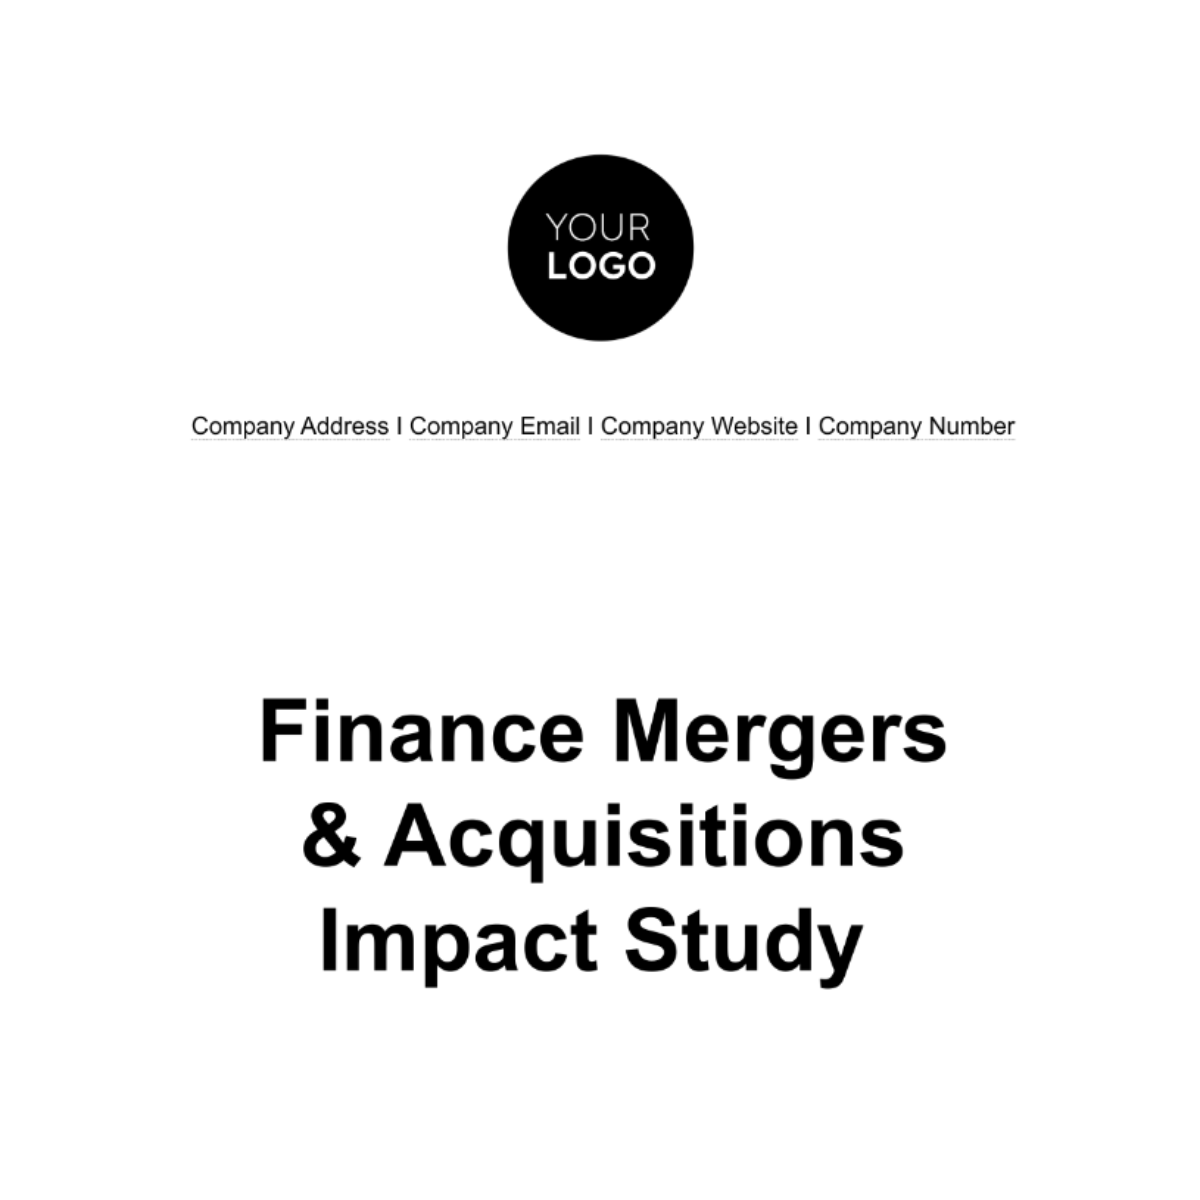 Free Finance Mergers & Acquisitions Impact Study Template